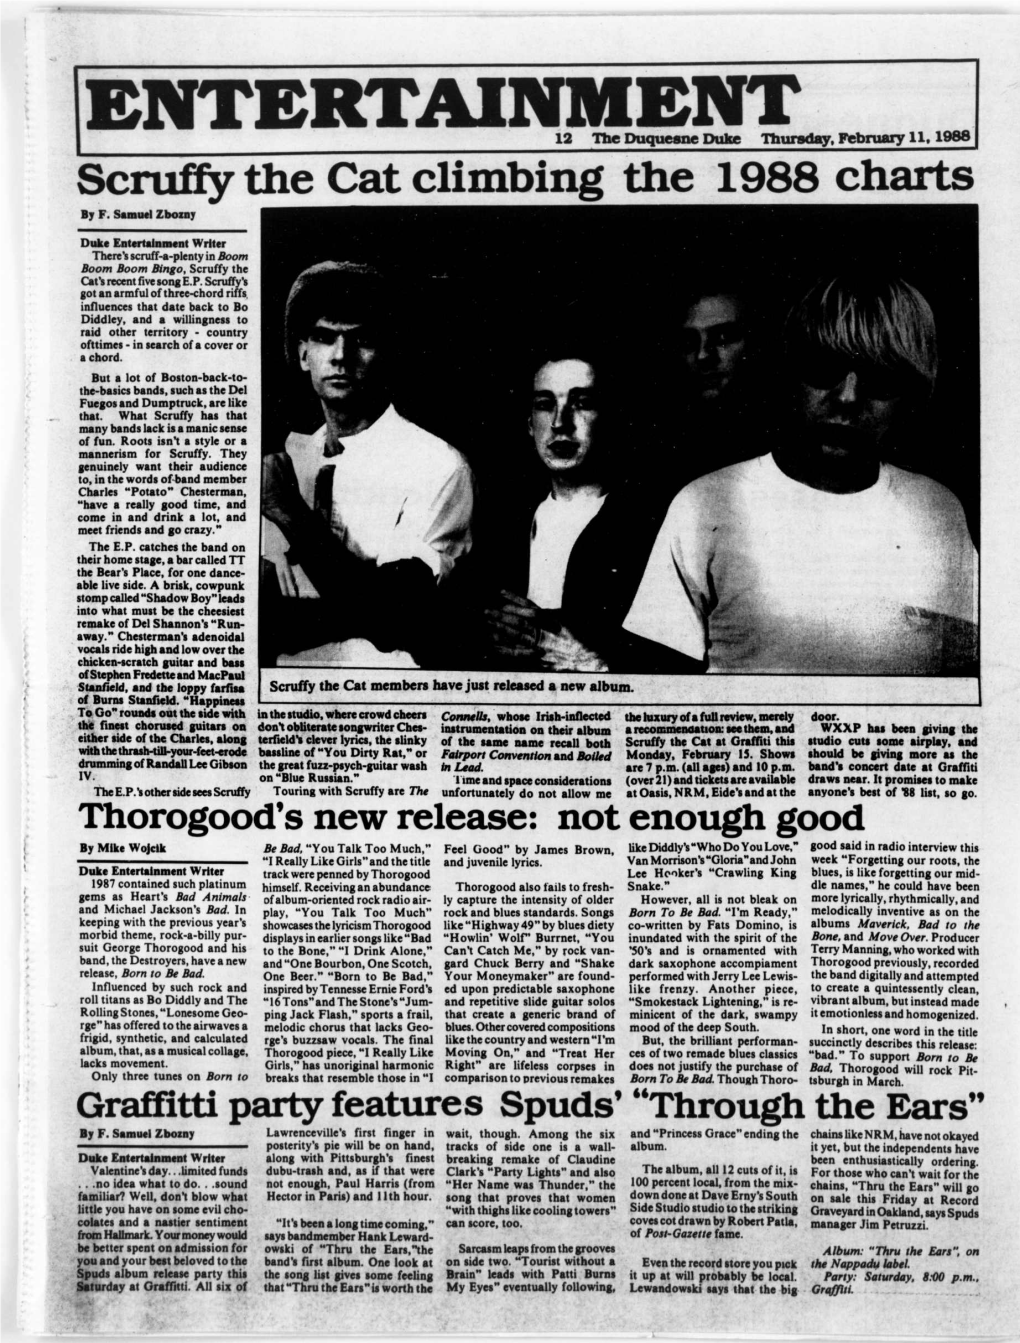 ENTERTAINMENT 12 the Duquesne Duke Thursday, February 11,1988 Scruffy the Cat Climbing the 1988 Charts by F